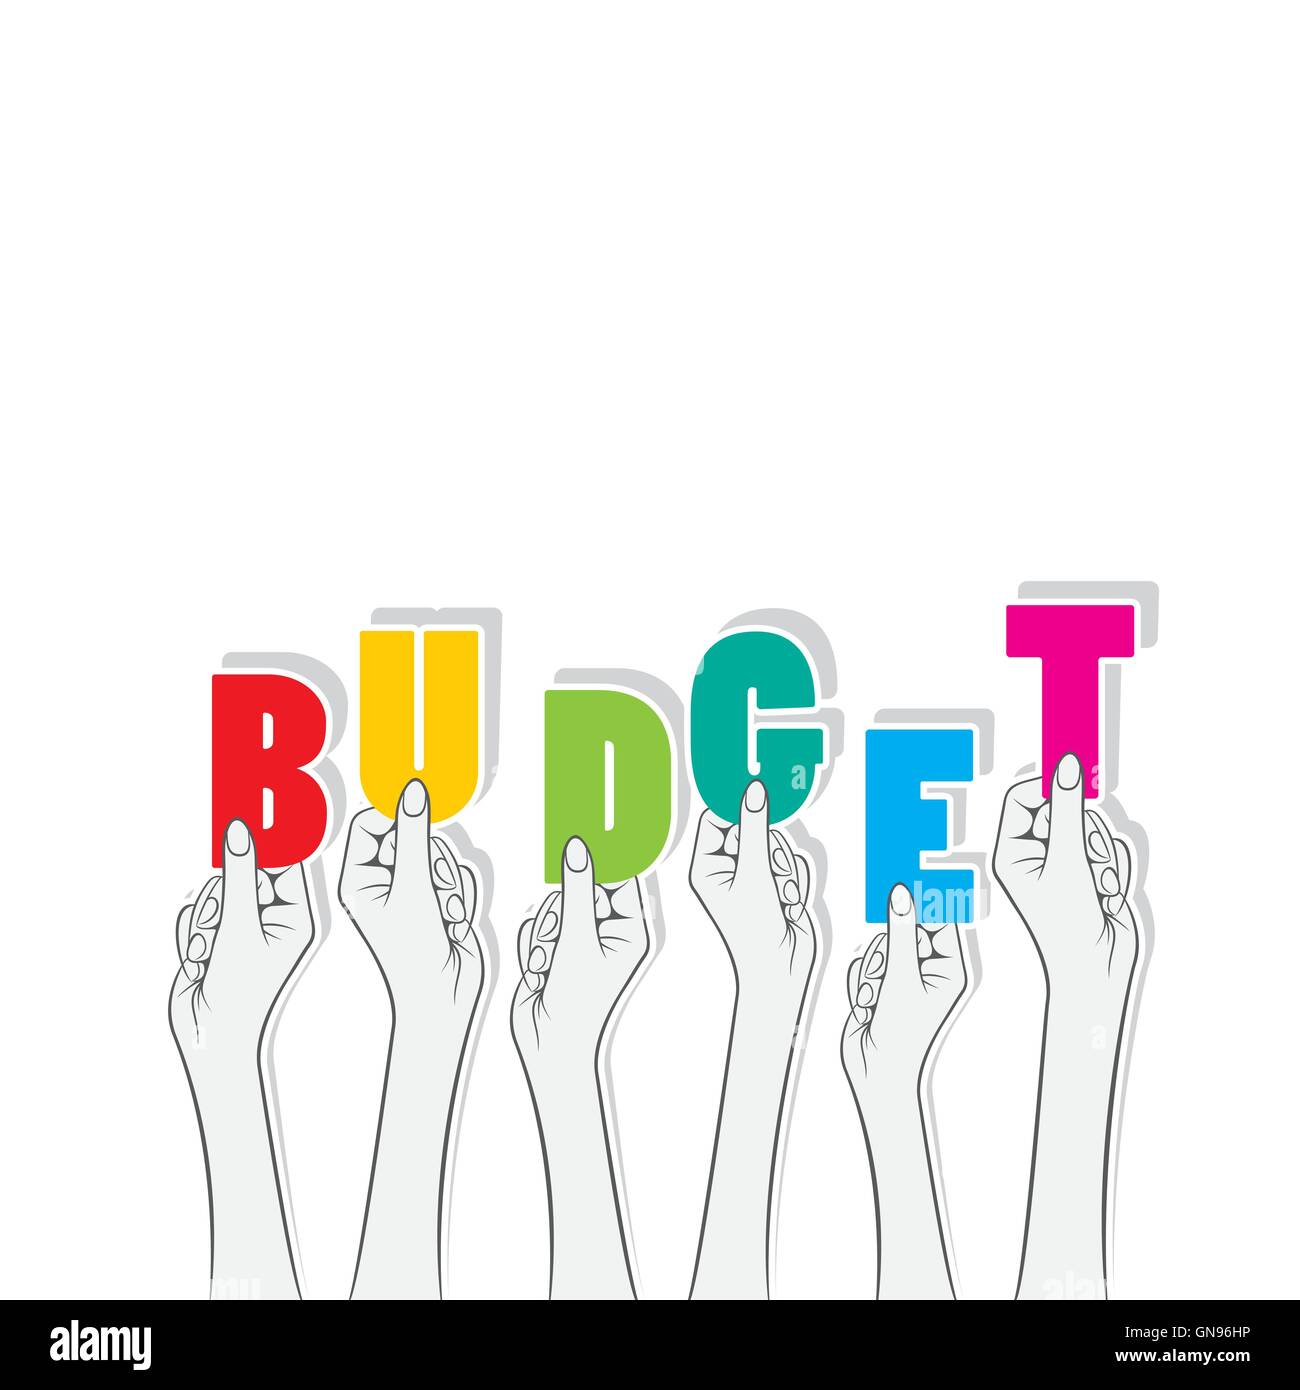 budget text hold in hand design Stock Vector